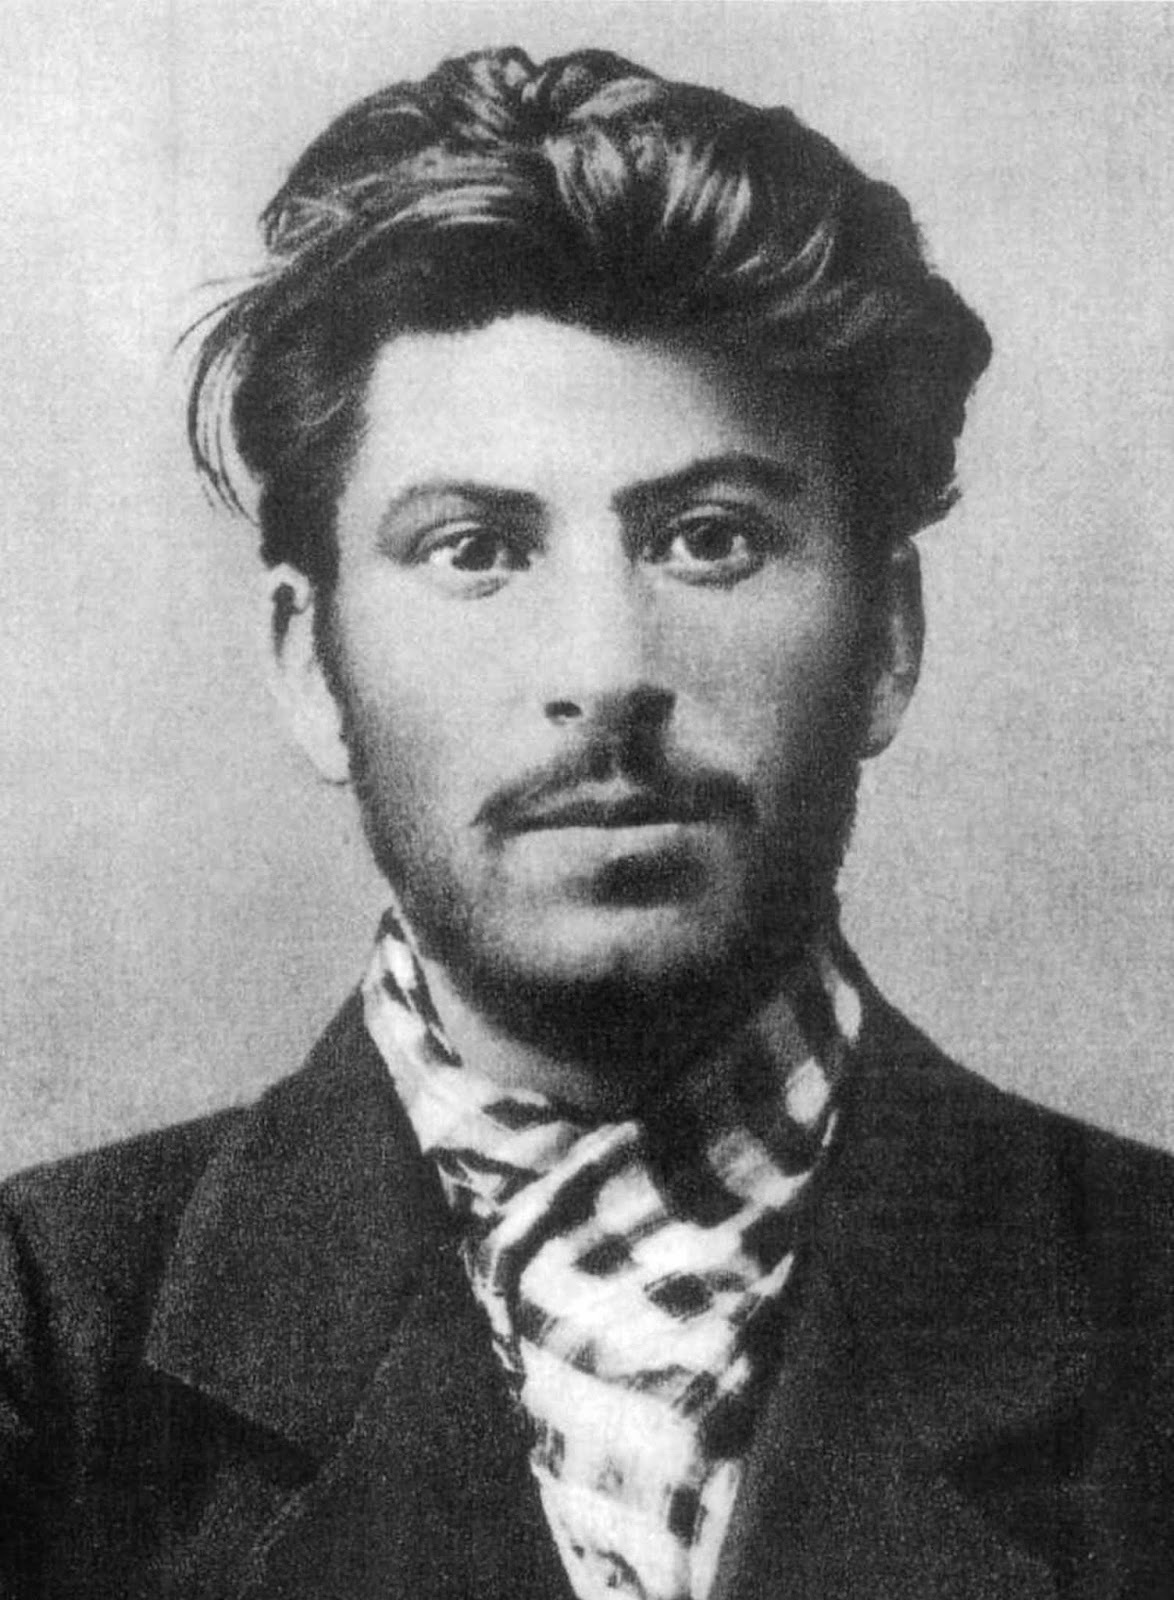 young_Stalin_1.jpg